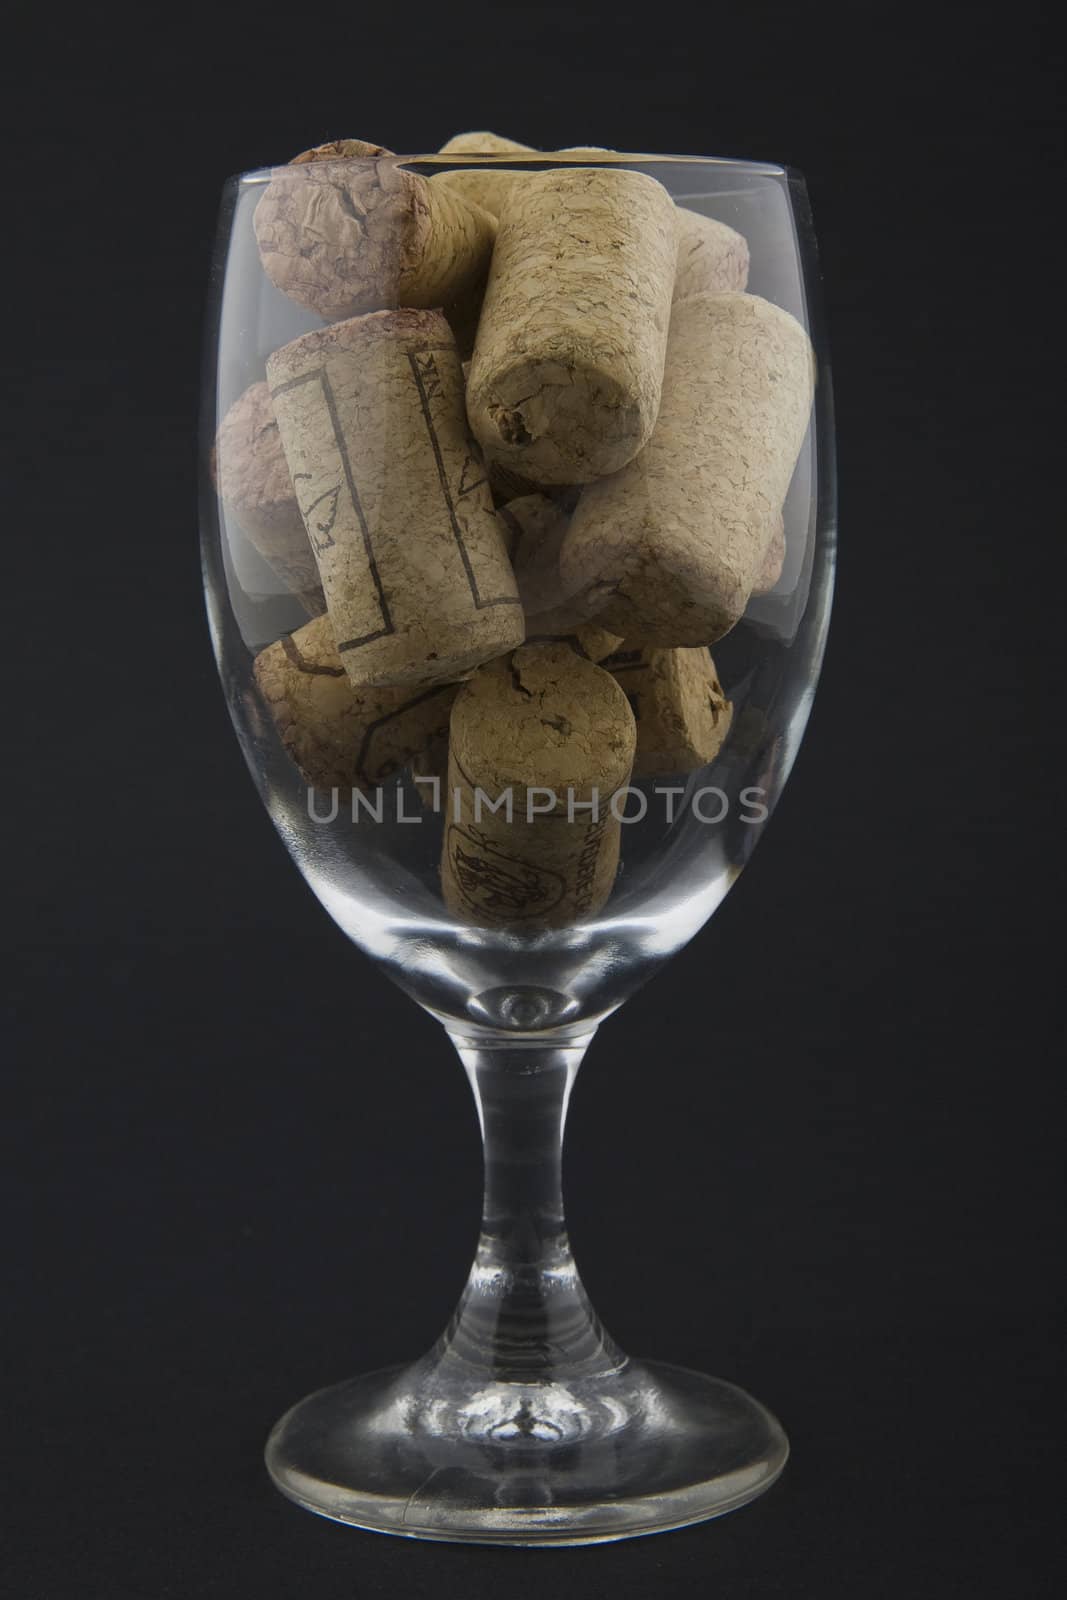 wineglass filled with corks by furzyk73